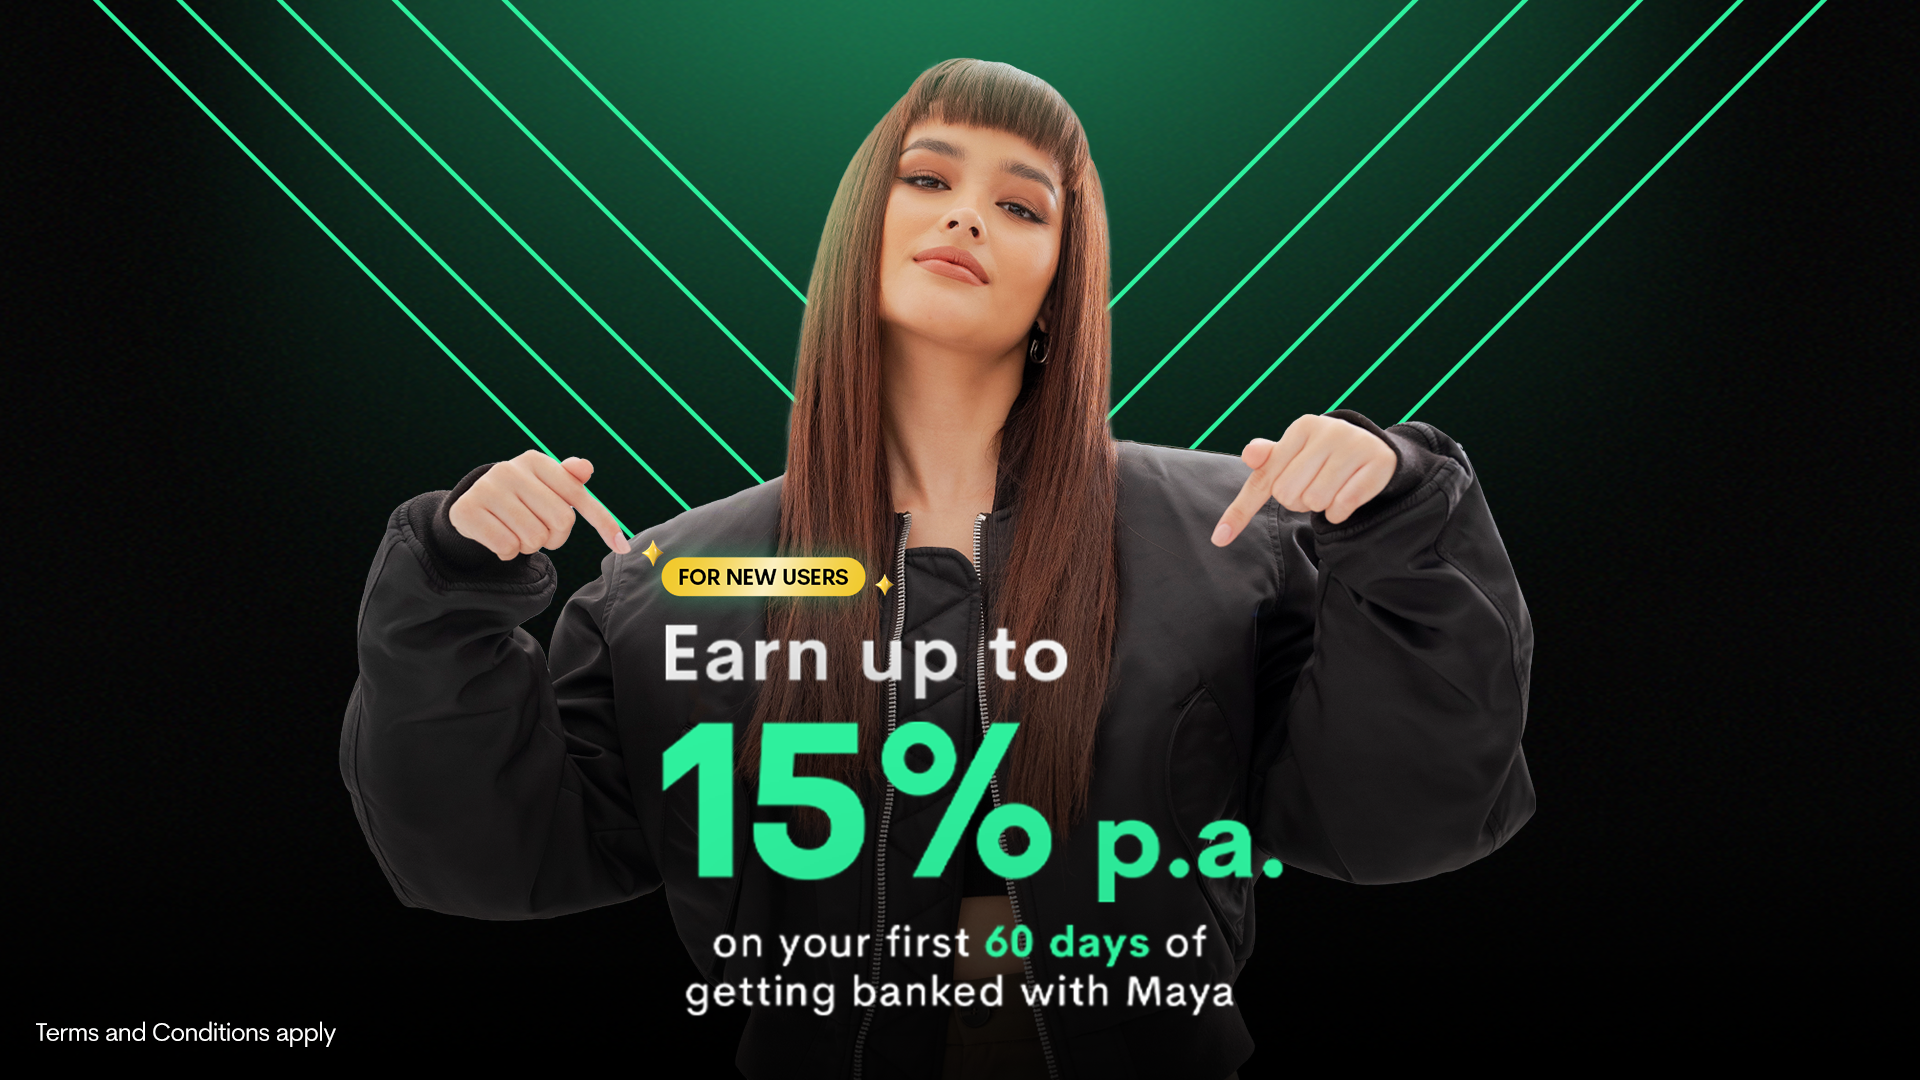 Get up to 15% p.a. for 60 days when you move to Maya today!